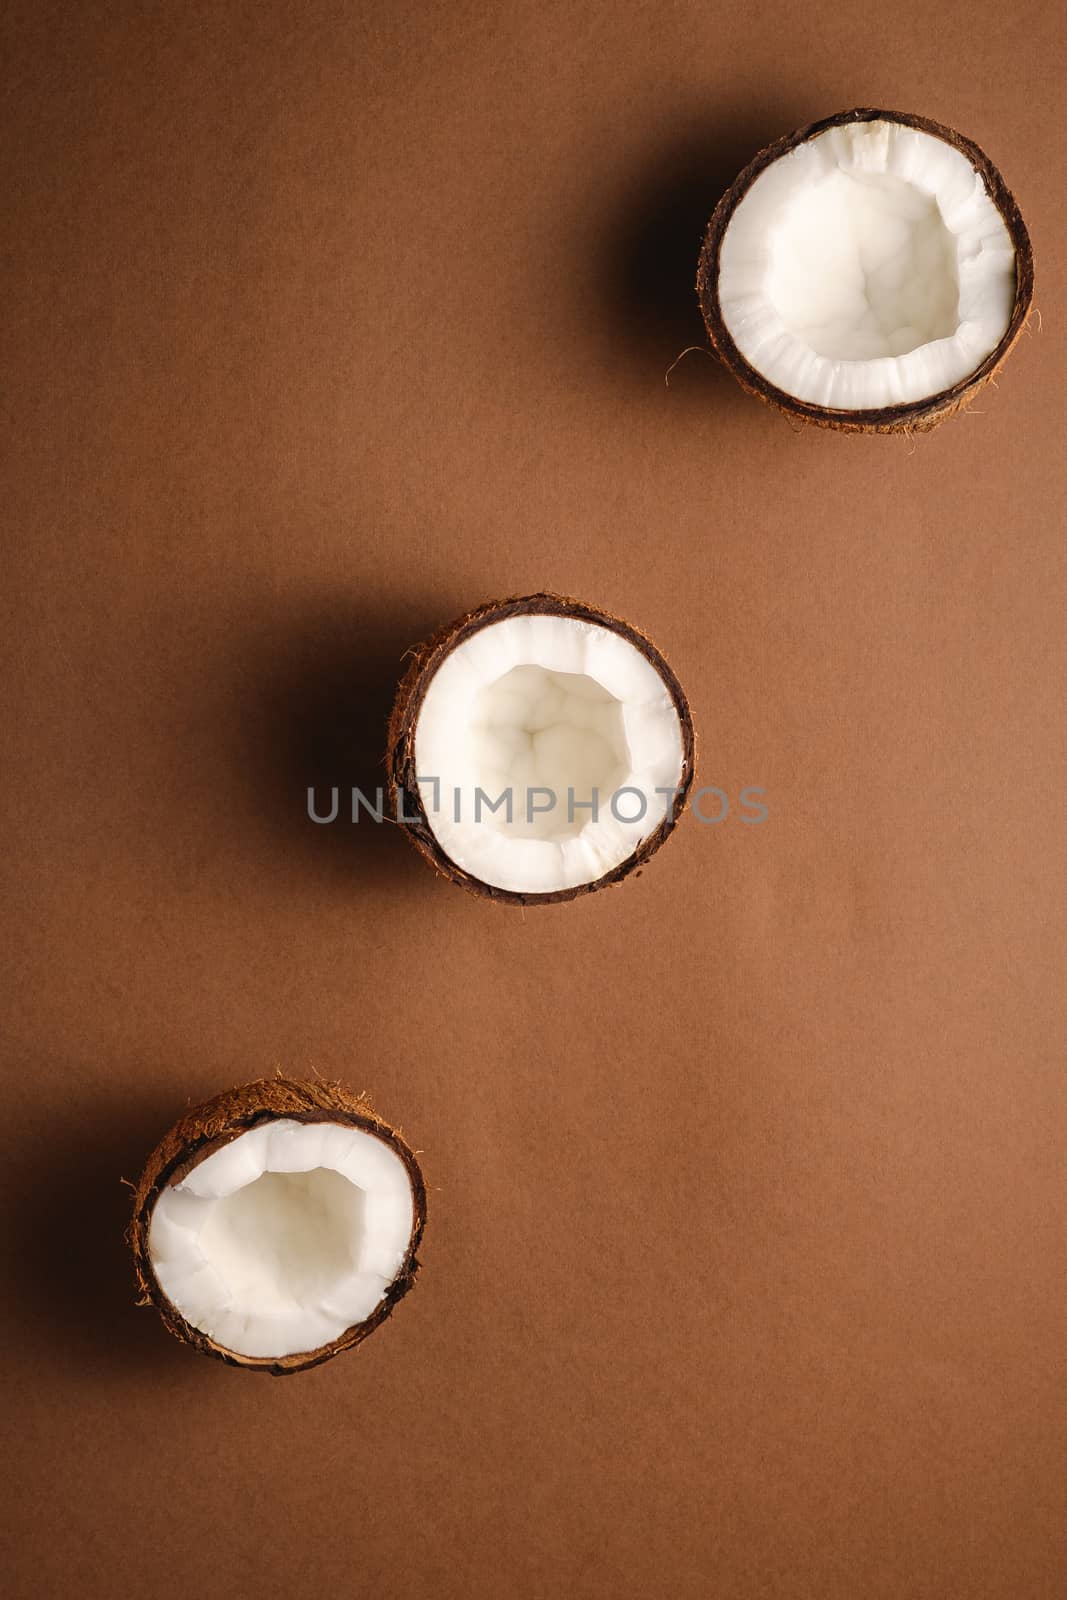 Three coconut fruits in row on brown plain background, abstract food tropical concept, top view